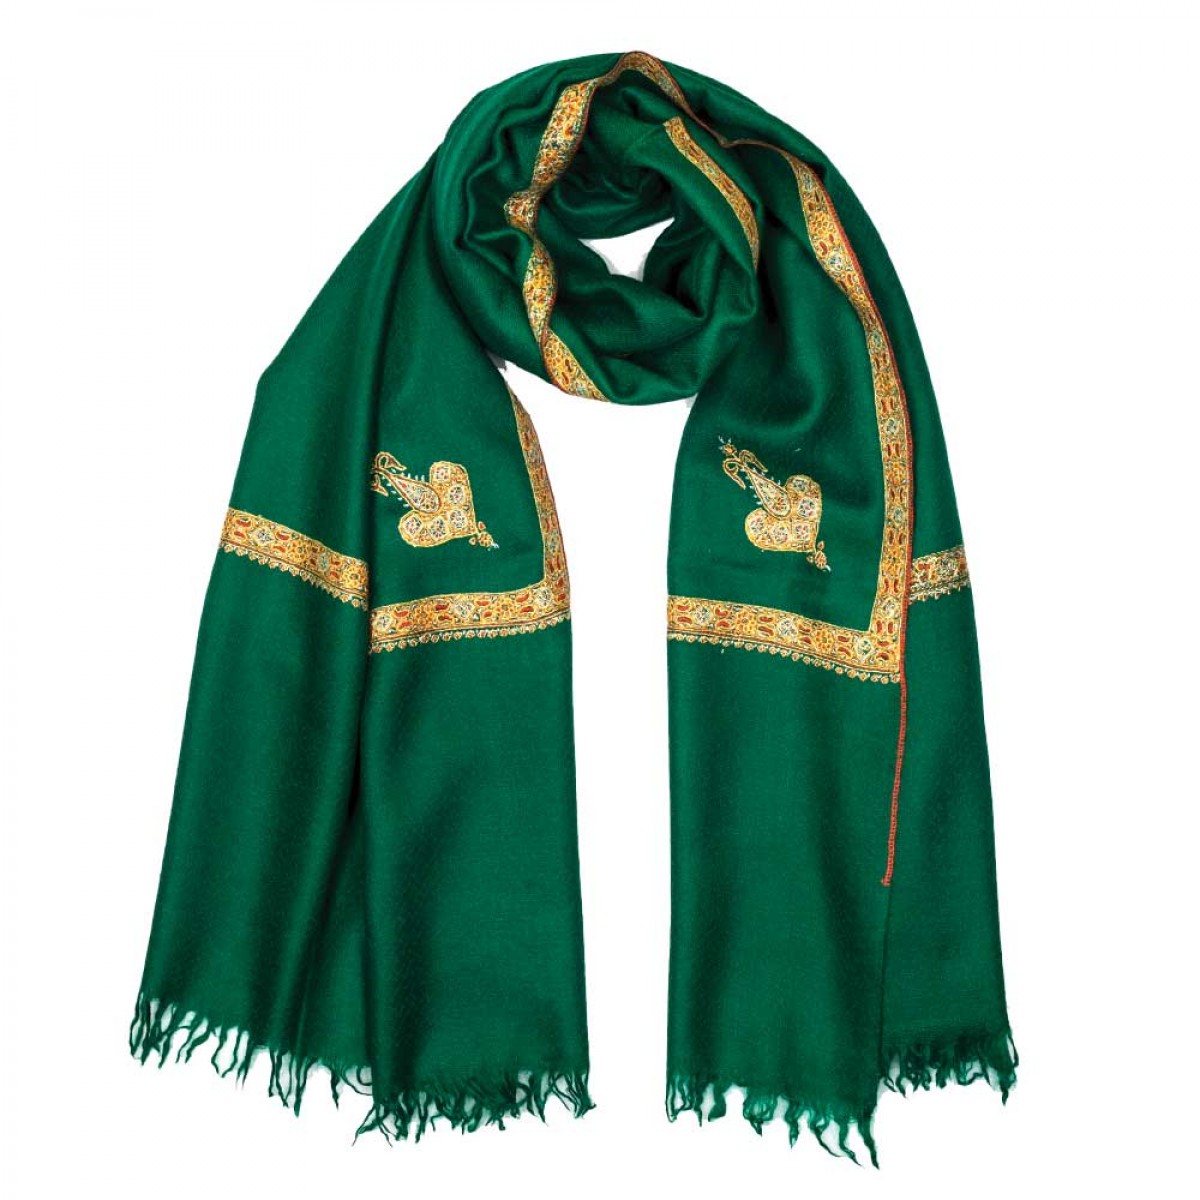 Embroidered Pashmina Stole - Emerald Green